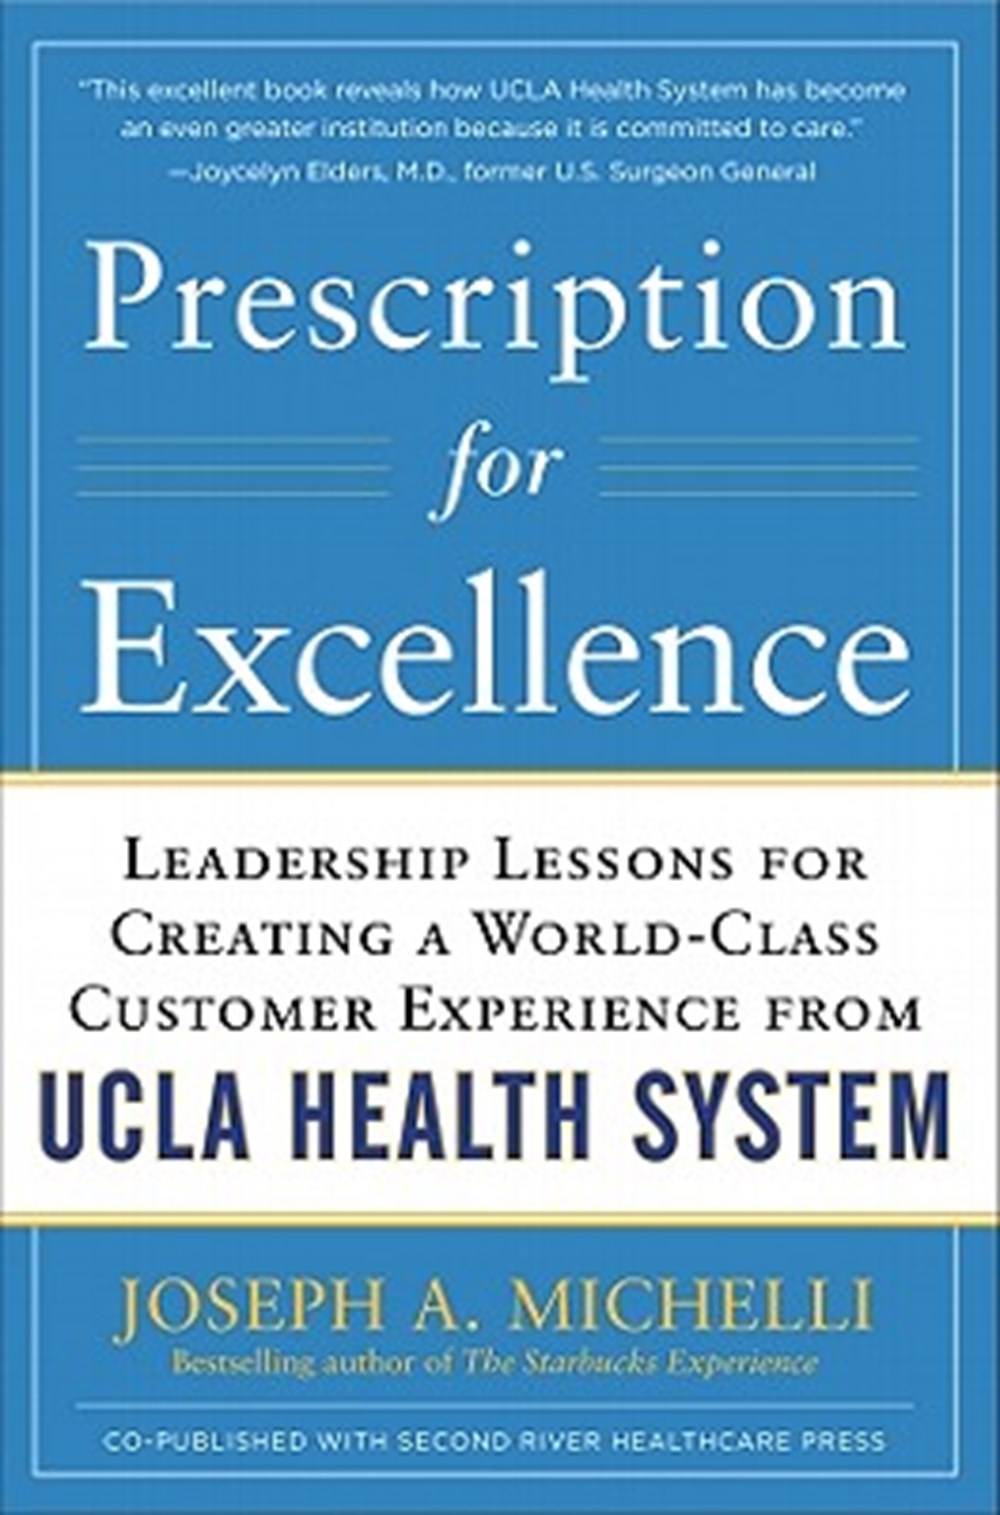 Prescription for Excellence Leadership Lessons for Creating a World-Class Customer Experience from U